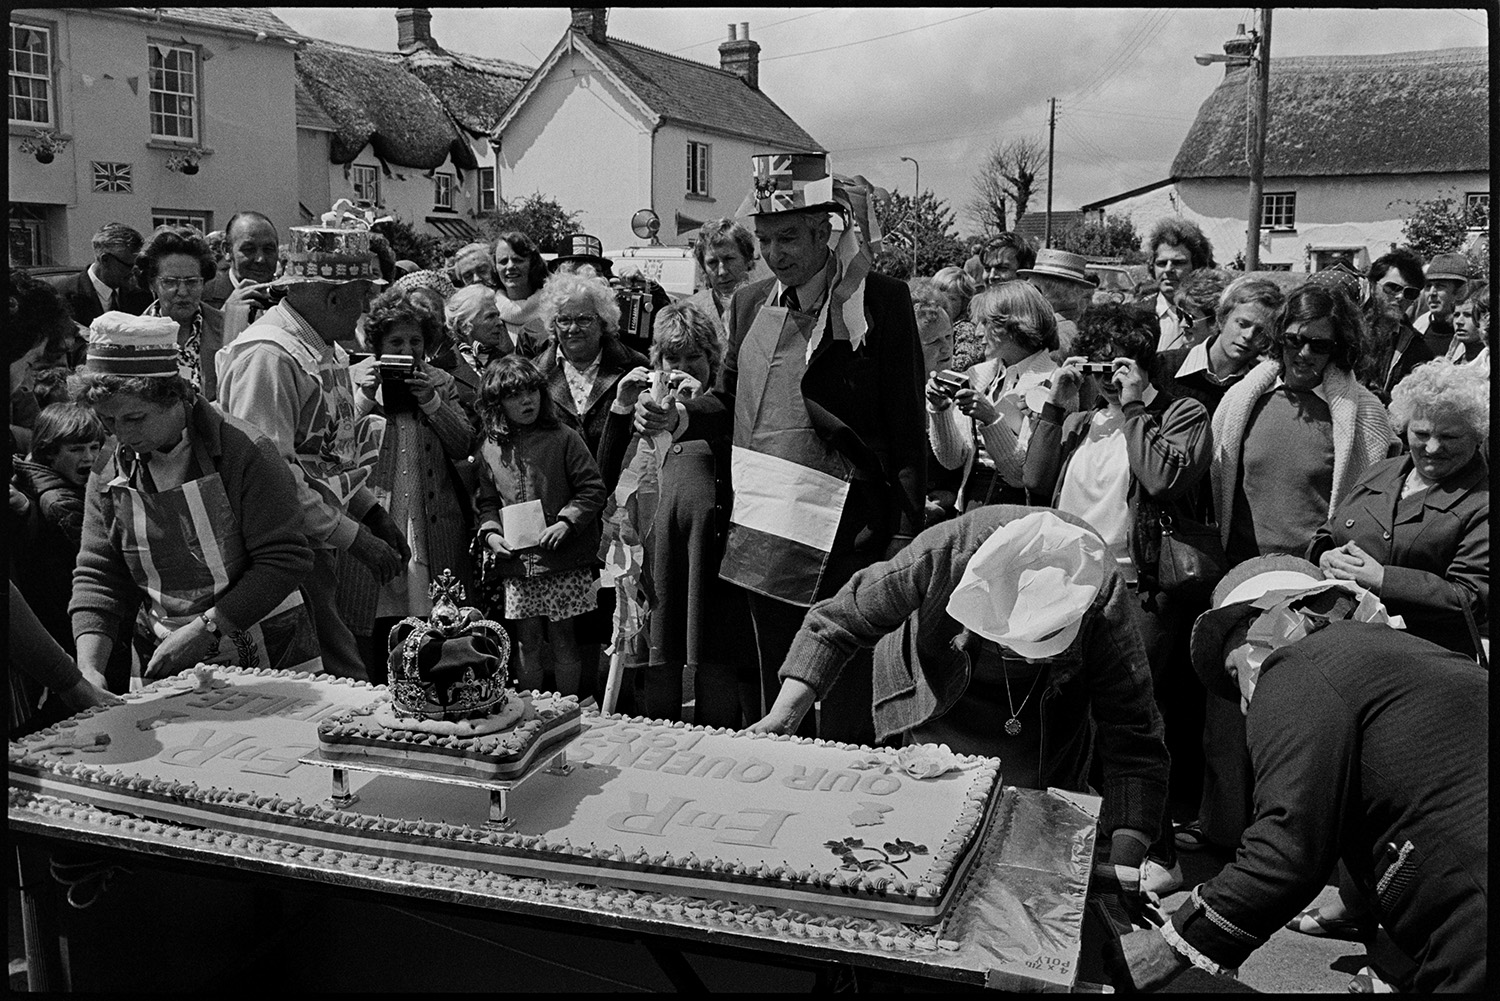 Procession for giant Jubilee cake, village square. Man listening to radio. 
[People securing a giant cake in Dolton village square on the Silver Jubilee of Queen Elizabeth II. A crowd is gathered around the cake and people are taking photographs. Some people are wearing decorated hats and aprons.]